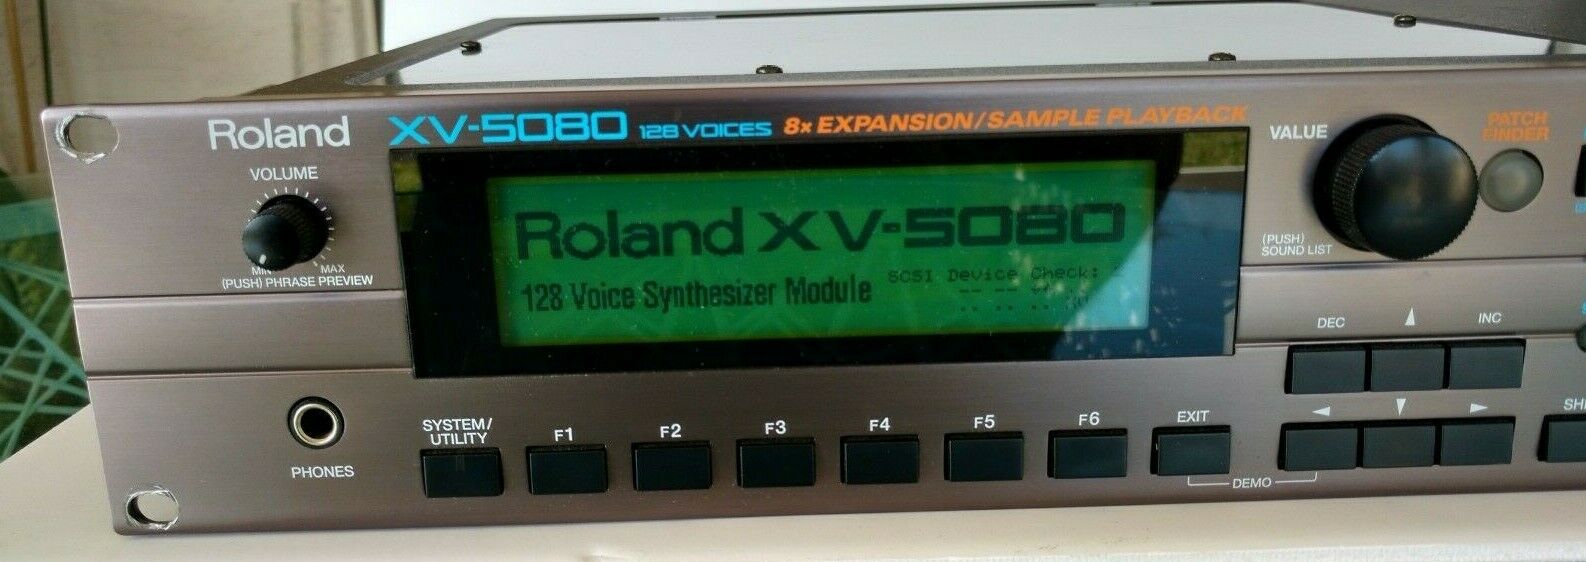 Roland XV-5080 Synthesizer / Sampler Rackmount Module w/ Manuals - FREE SHIPPING